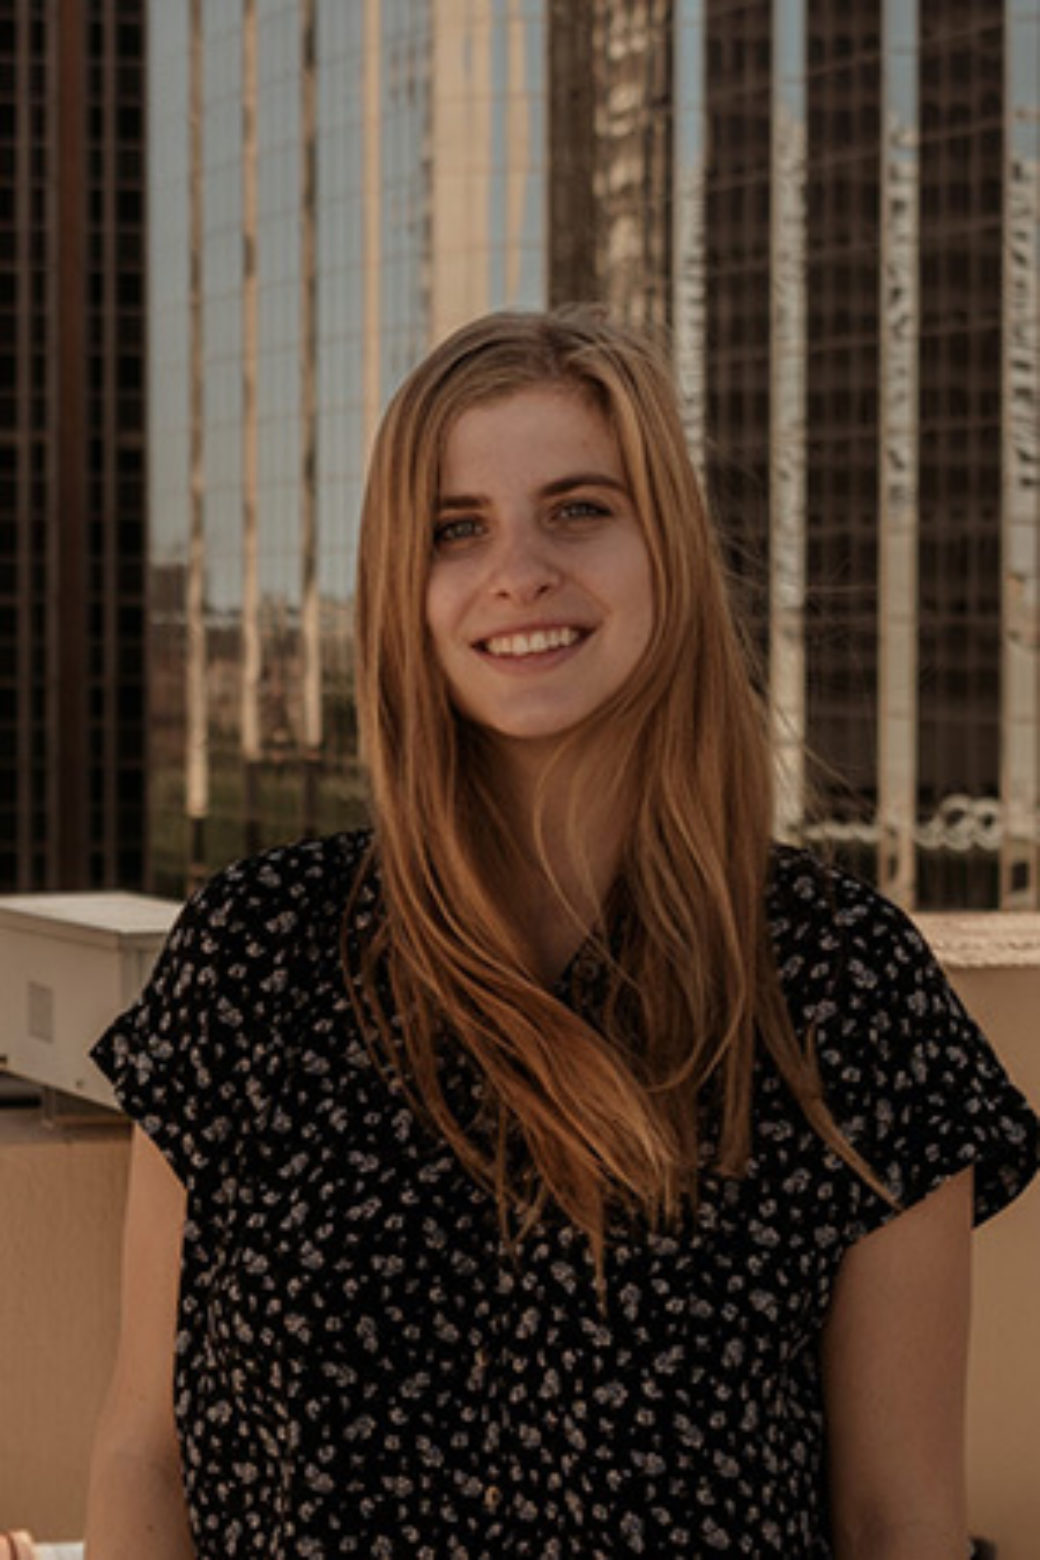 Woman with long strawberry blonde hair smiles at the camera against a city landscape